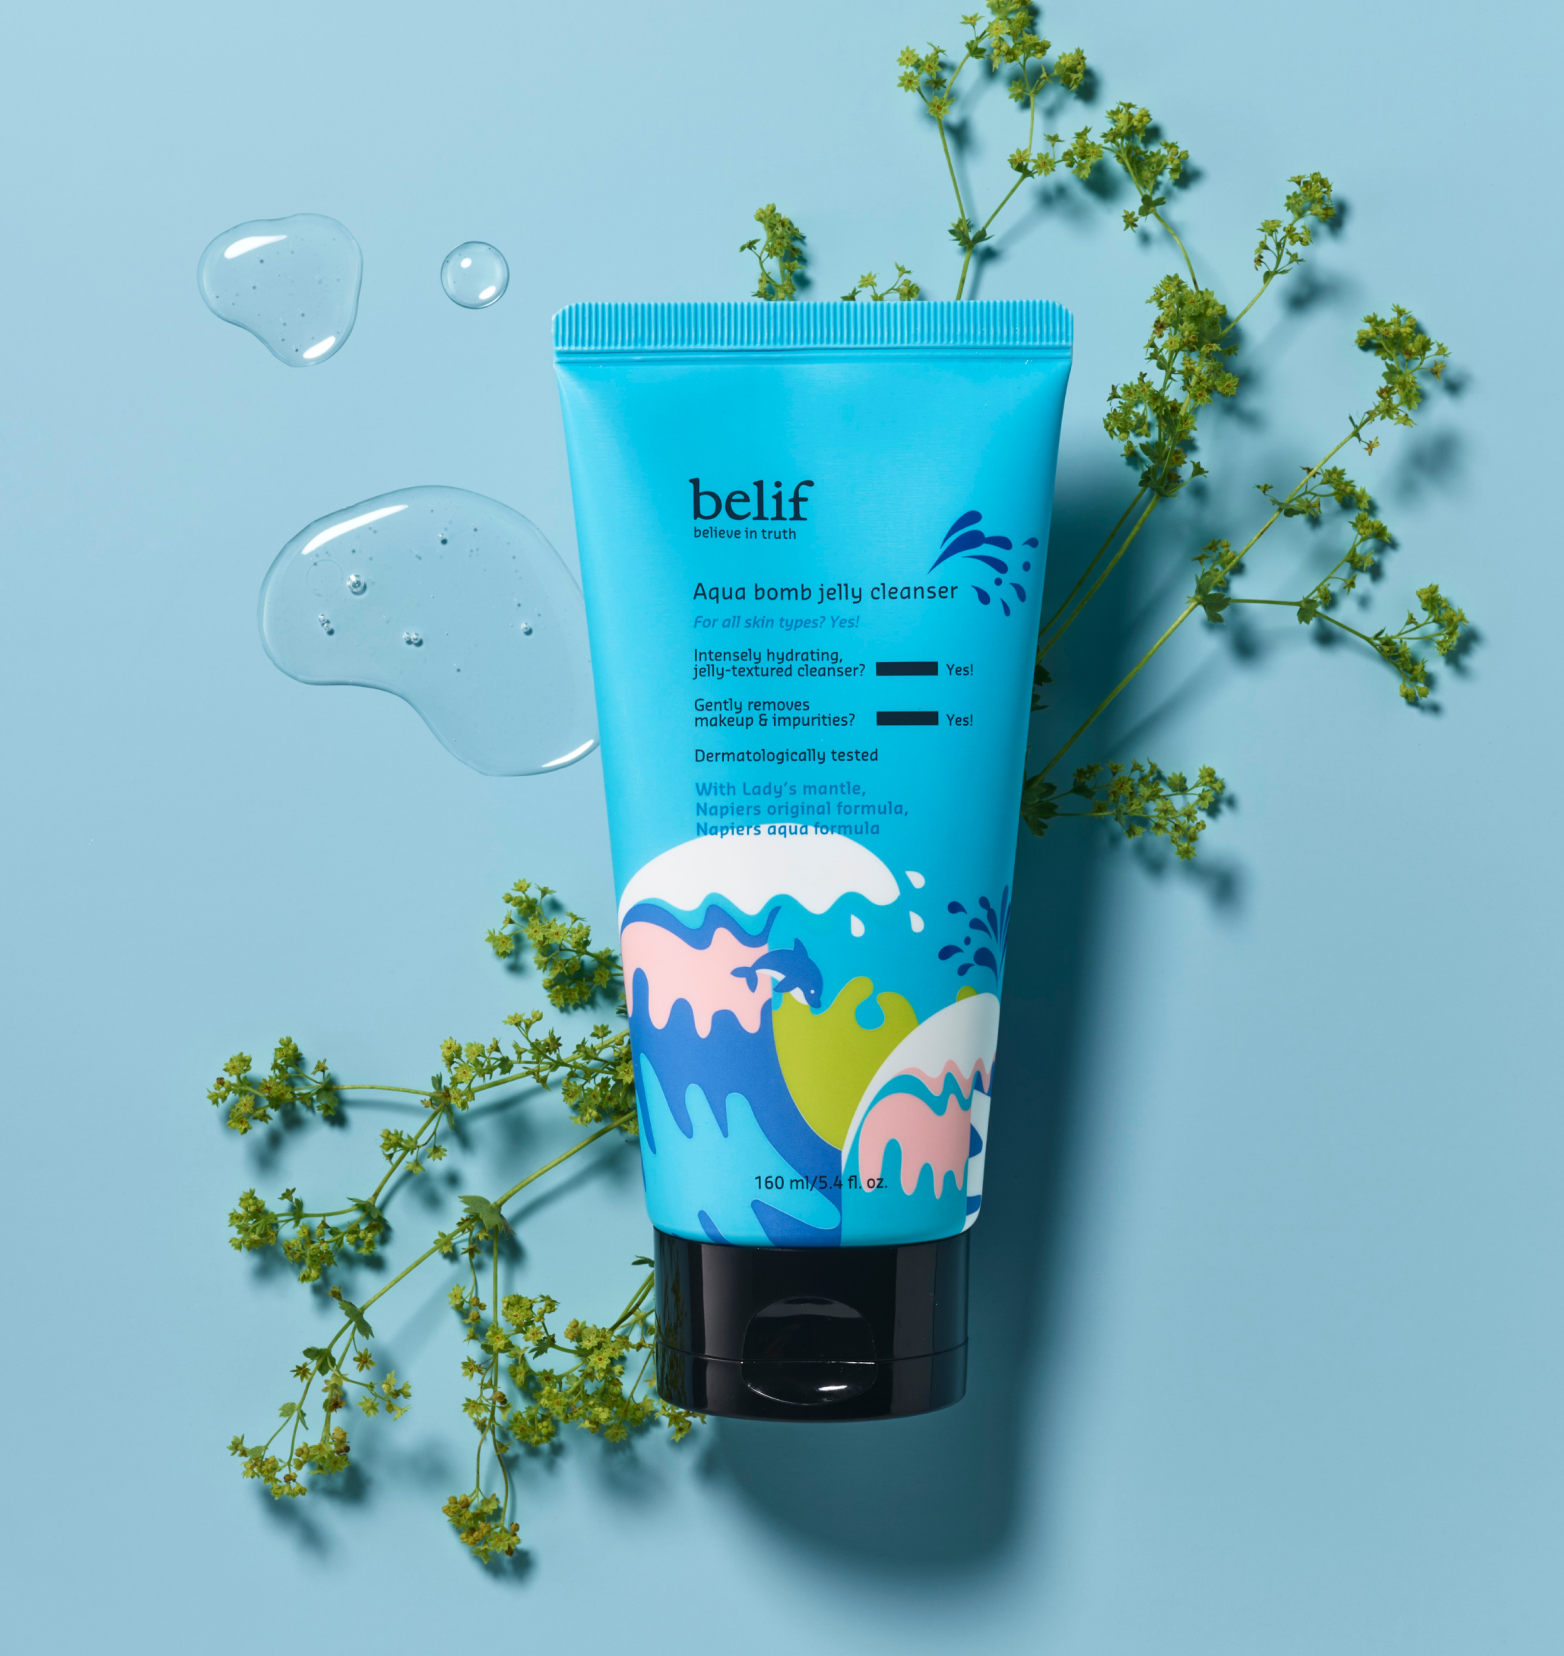 A blue bottle of belif Aqua Bomb Jelly Cleanser lying on a herb twig on a light blue surface with a few drops of the cleanser around it